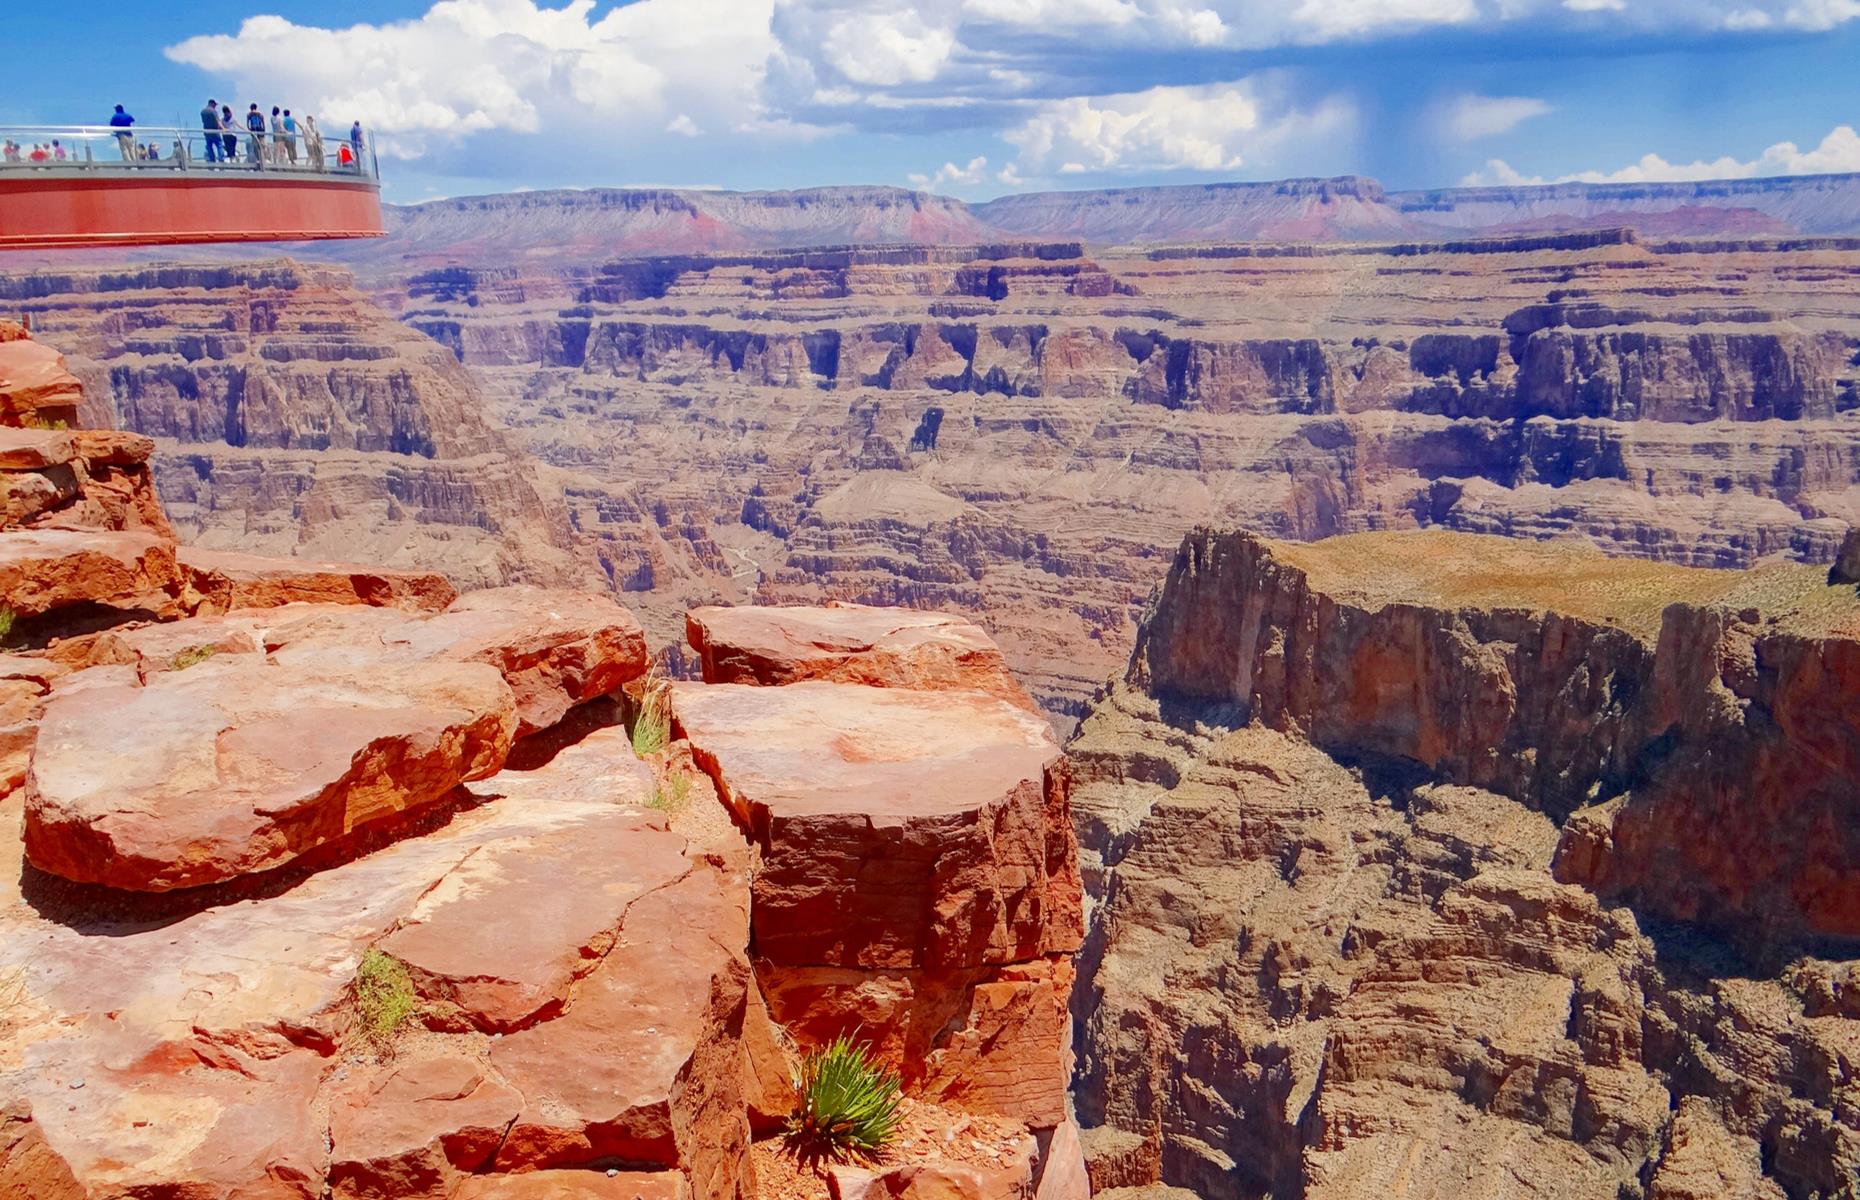 <p>No US travel wish list would be complete without the <a href="https://www.nps.gov/grca/index.htm">Grand Canyon</a>: the mother of America's natural wonders and one of the country's most popular attractions. The park's rust-red landscape might look more at home on Mars, opening out into an 18-mile (29km) wide chasm, through which the Colorado River beats its path. Open year round, the Canyon's South Rim is the most popular place to explore. The North Rim (open seasonally) has fewer crowds, while Grand Canyon West is home to the teeth-chattering Skywalk (pictured).</p>